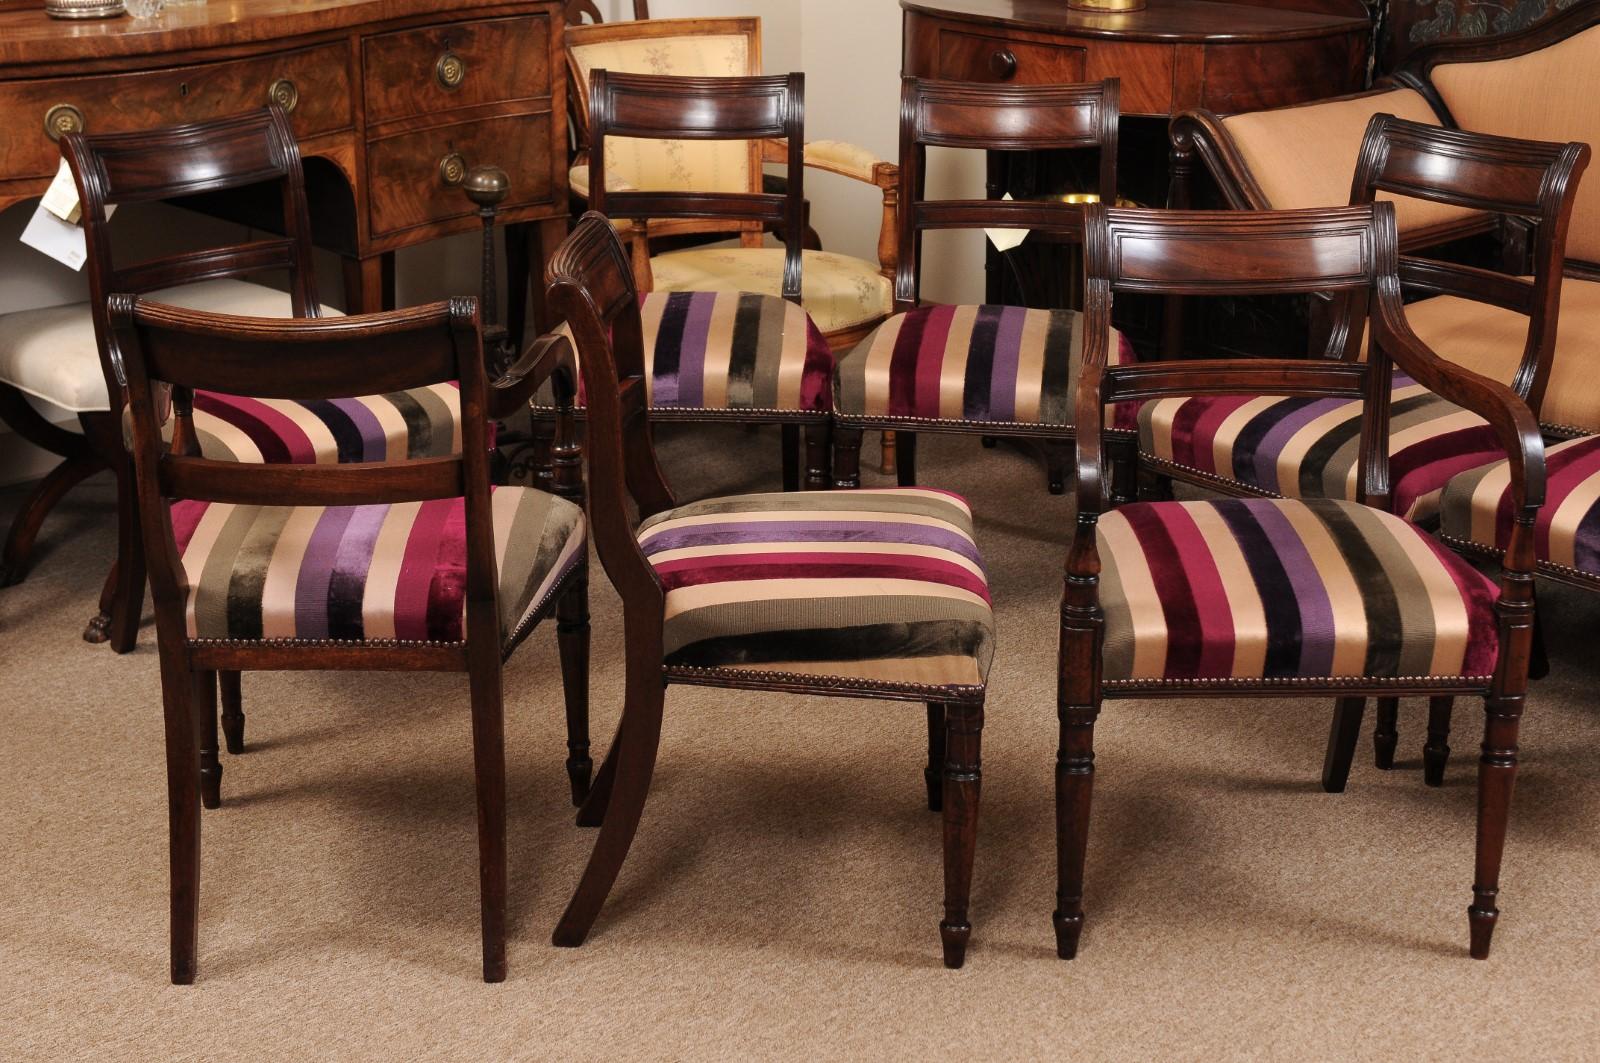 Set of 19th century English regency dining chairs in mahogany with turned front legs, splay rear legs, and reeded detail. Set includes two (2) arm chairs and six (6) side chairs.

Measures: sides 19